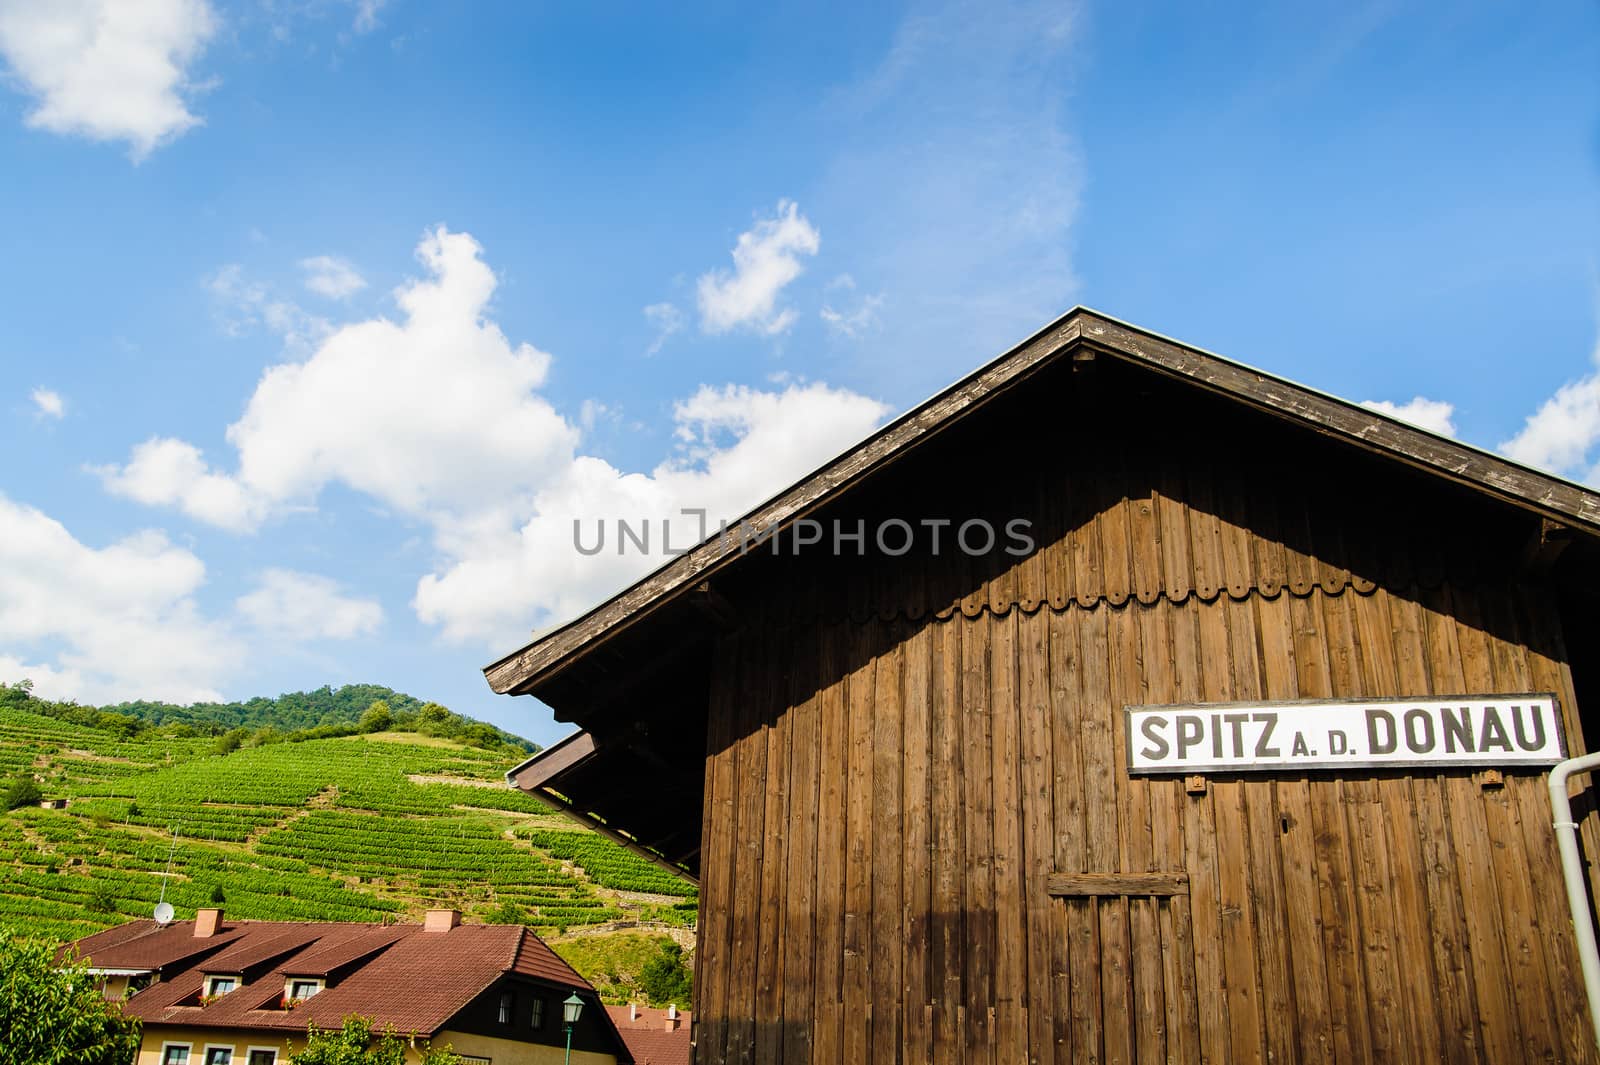 Wooden Hut with Sign on it in Wachau